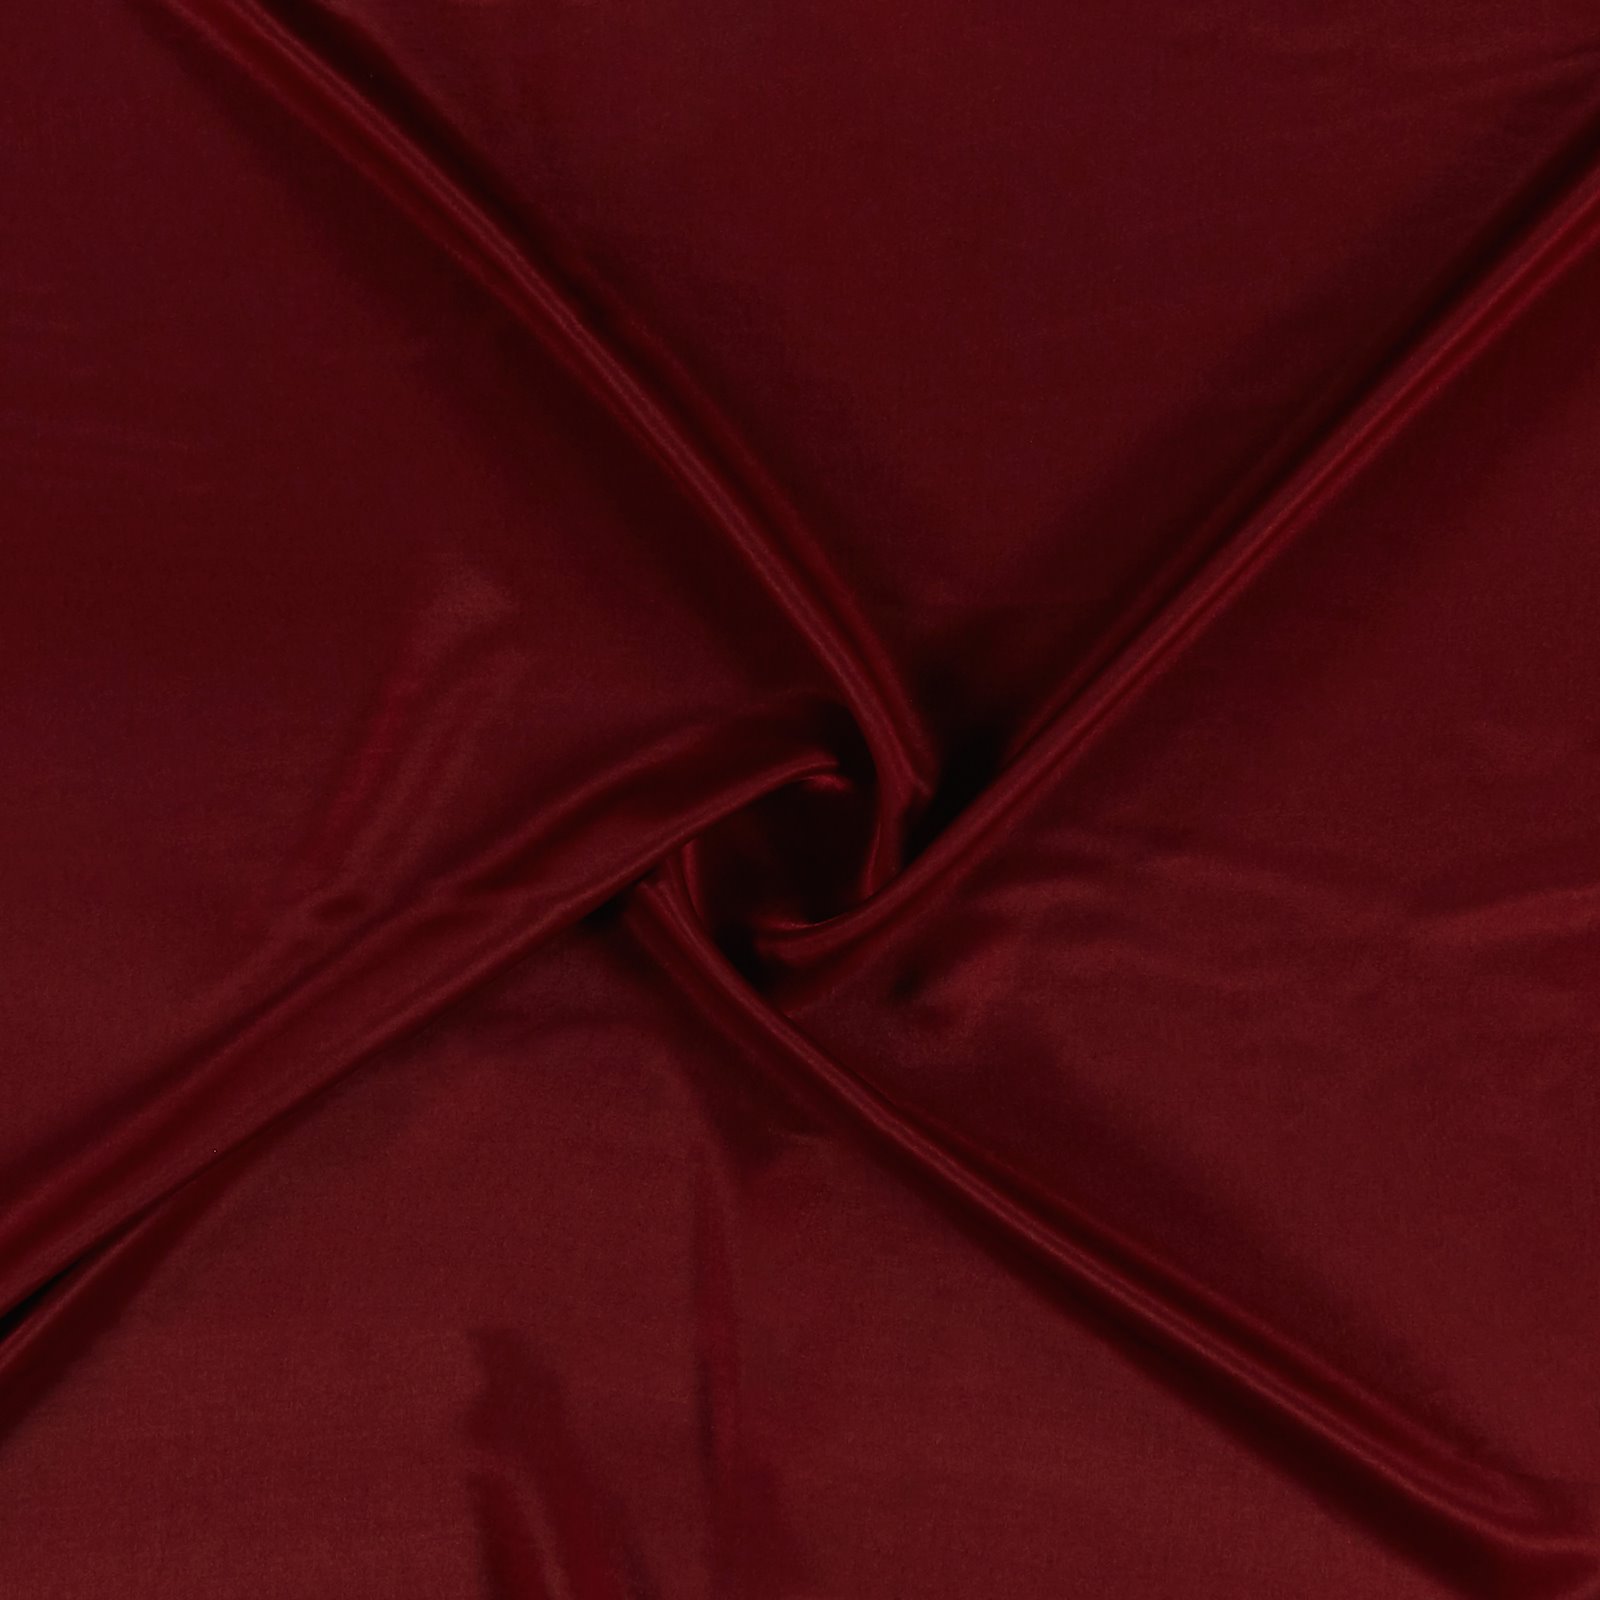 Woven viscose/polyester dark red 701919_pack